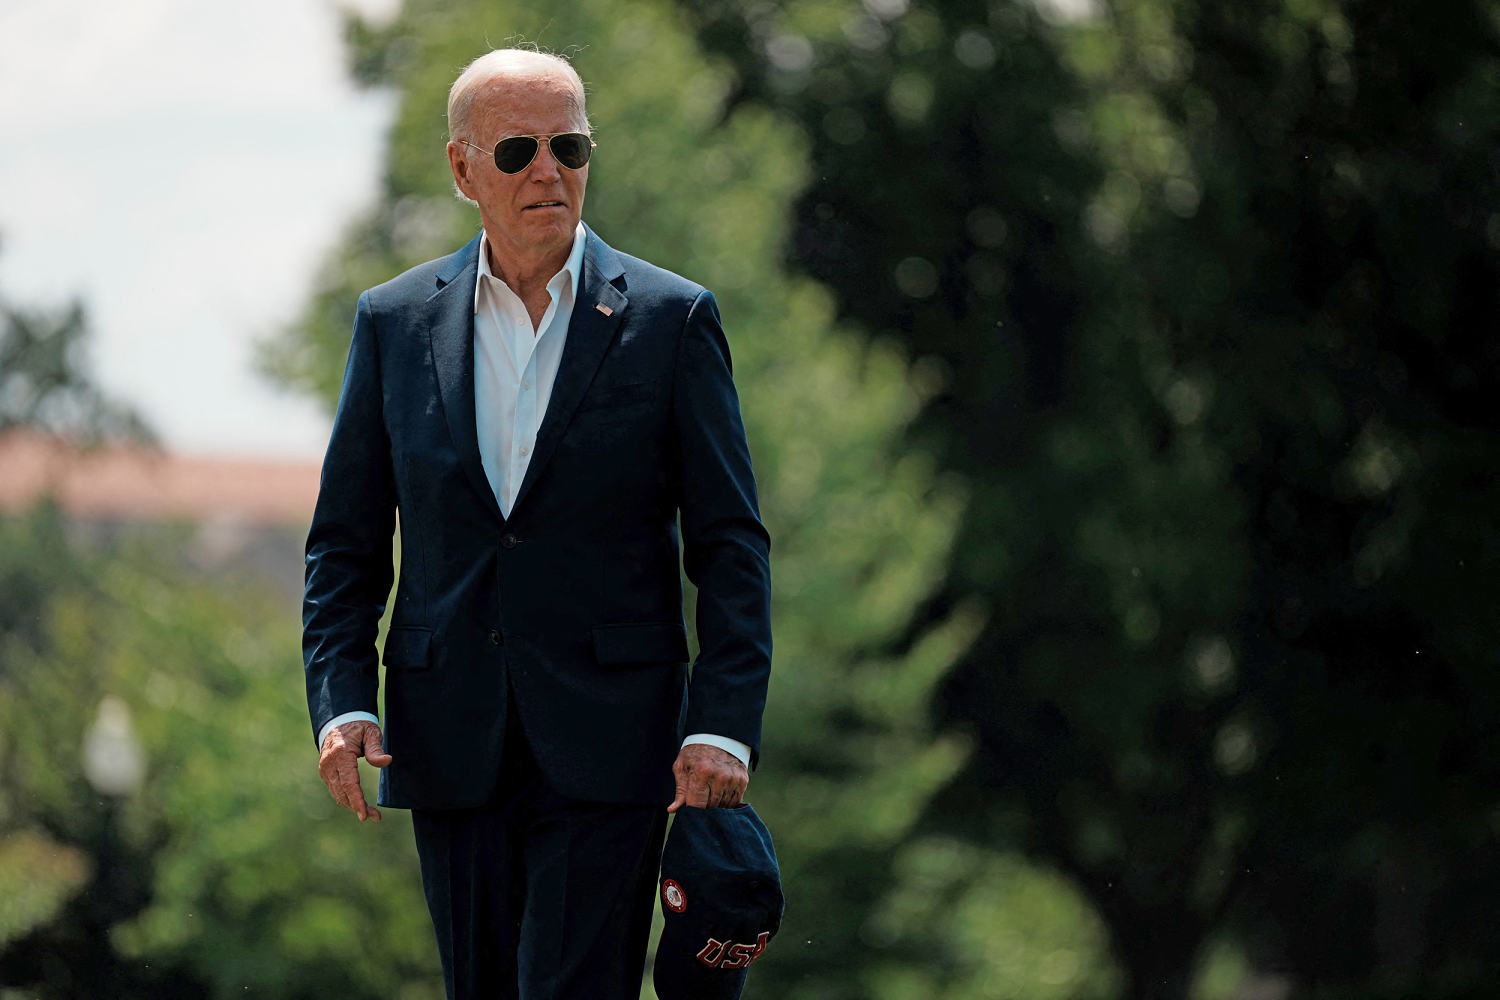 What needs to happen for Biden's presidential immunity amendment to pass